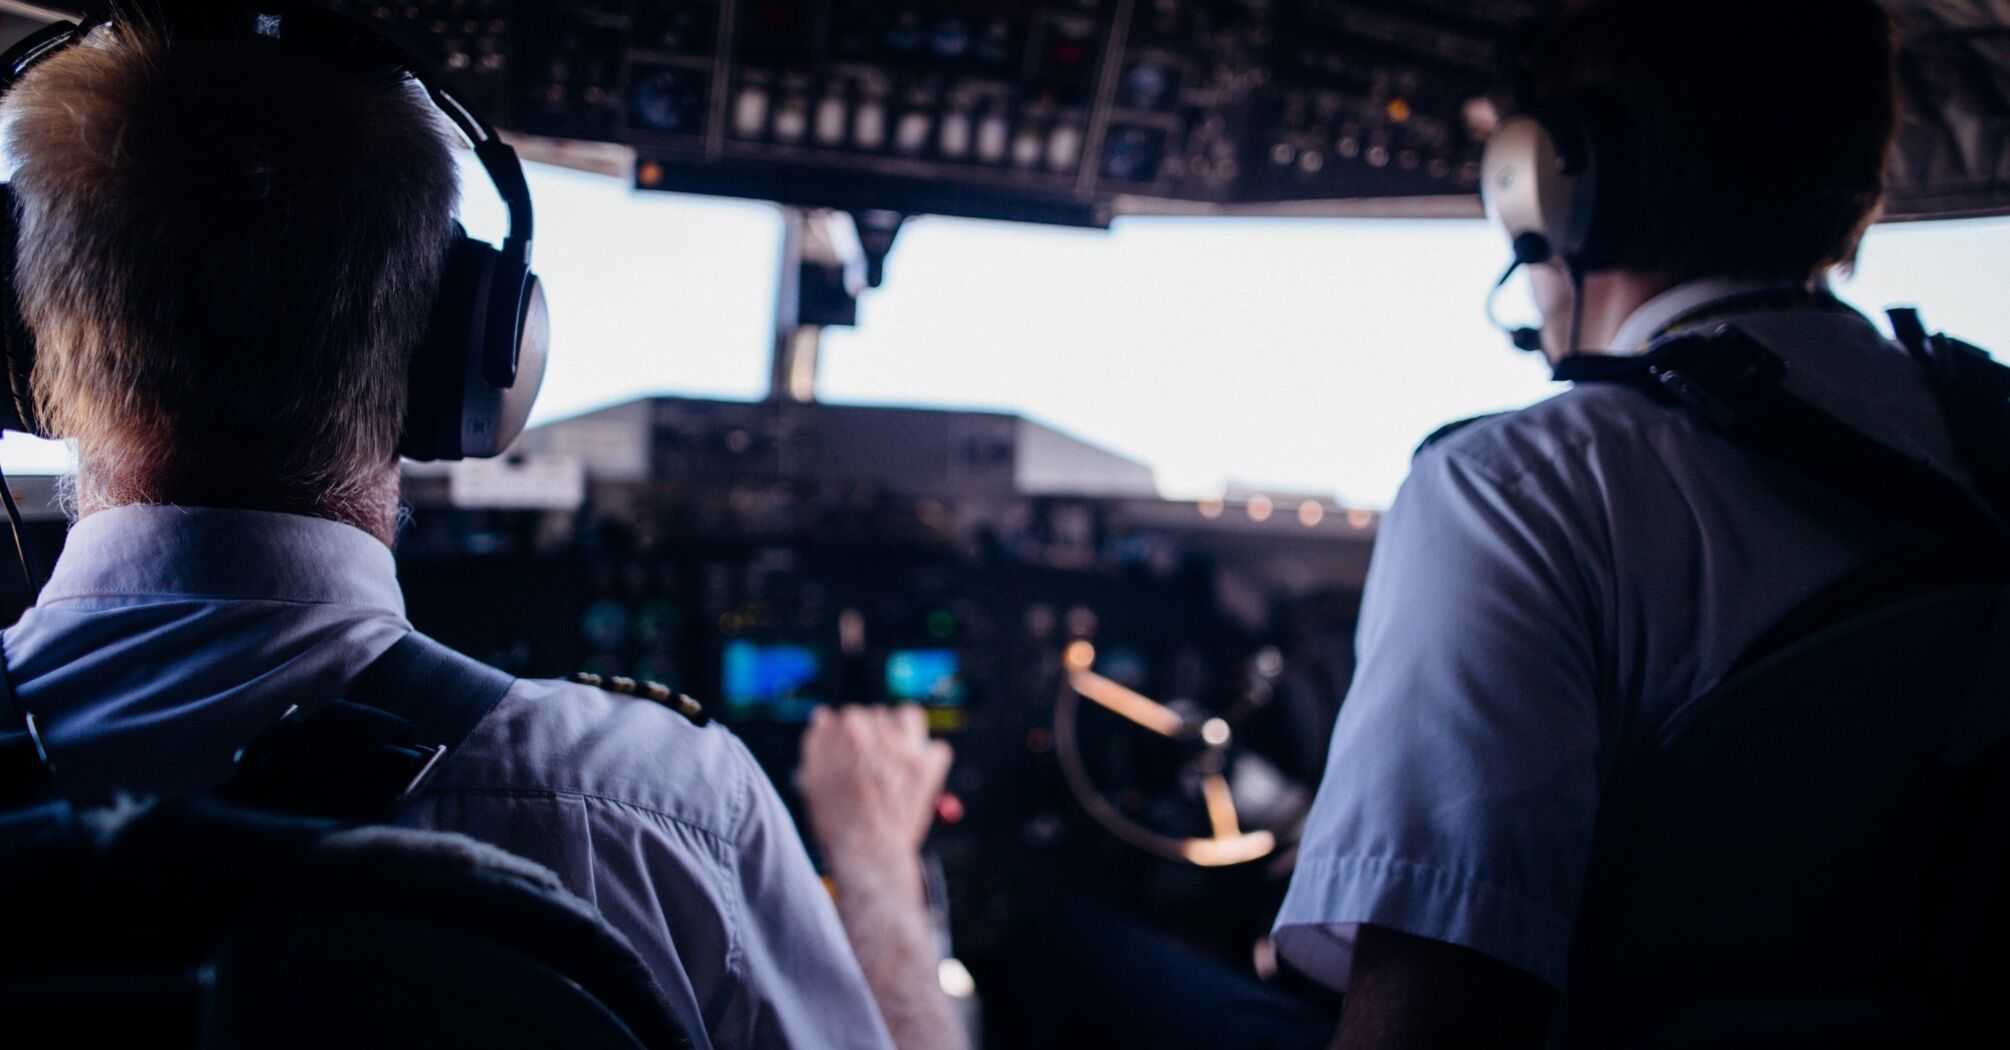 The 8 things pilots never do when they're airline passengers